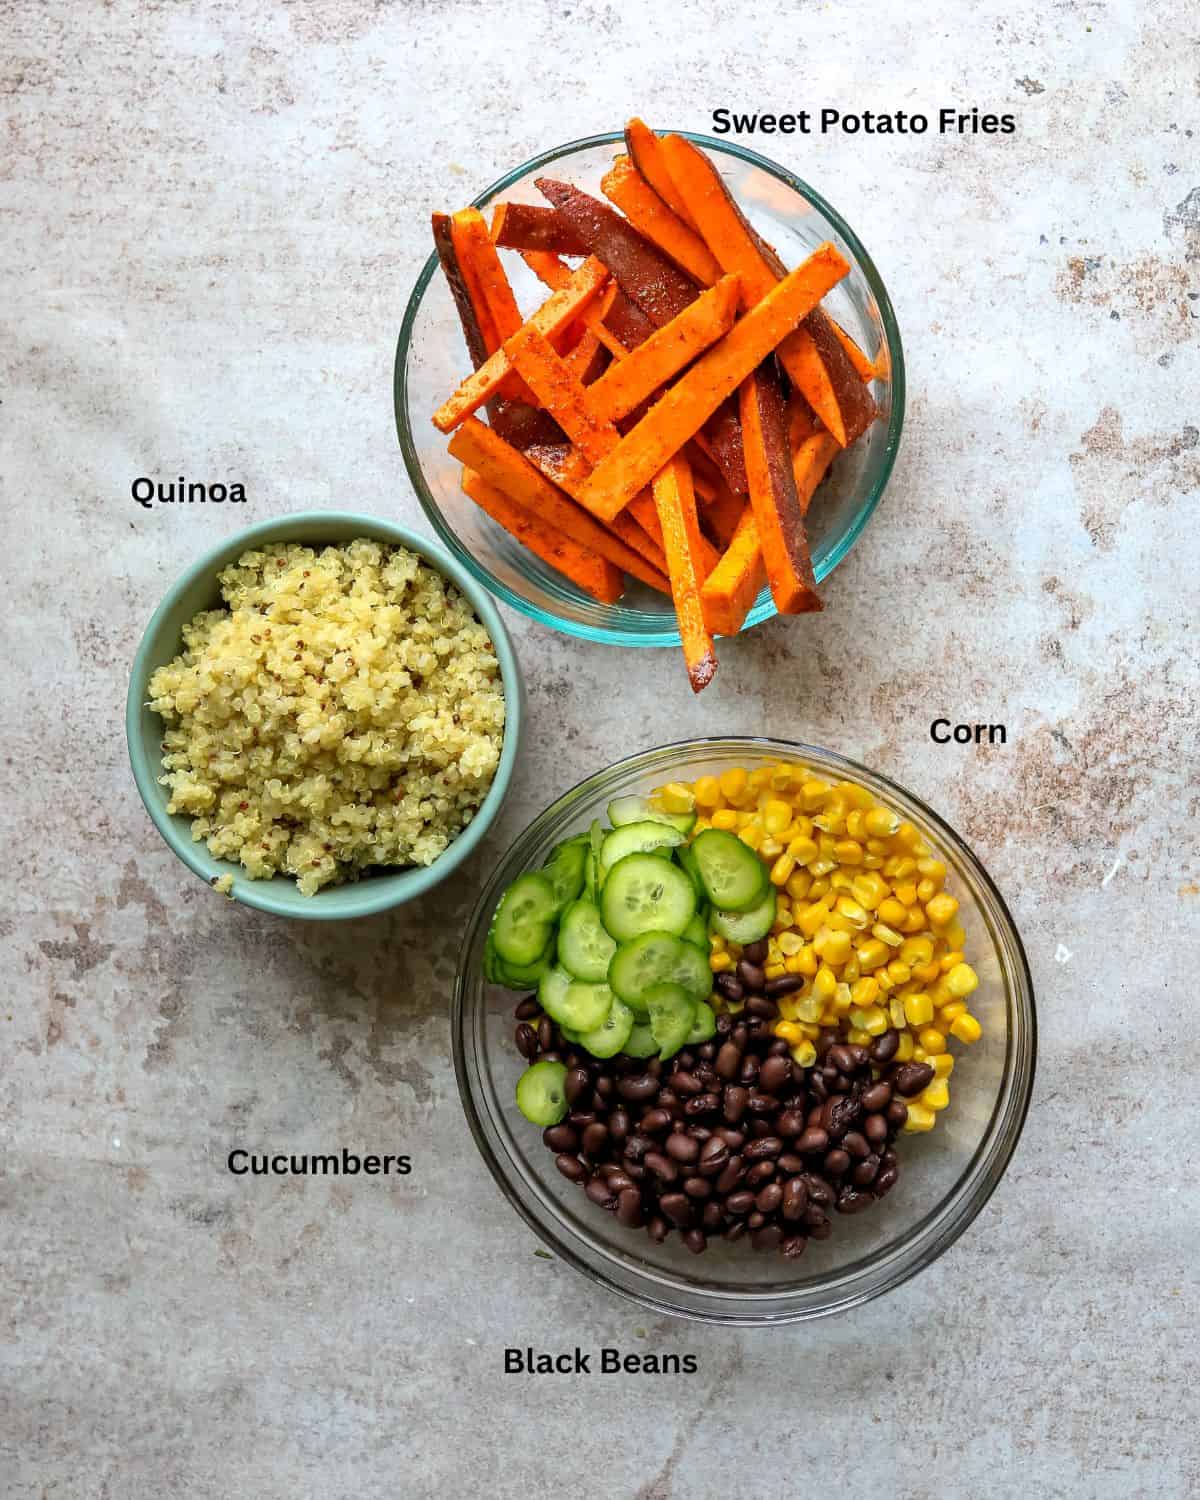 Bowls of sweet potato fries, quinoa, and corn with black beans with text labels.